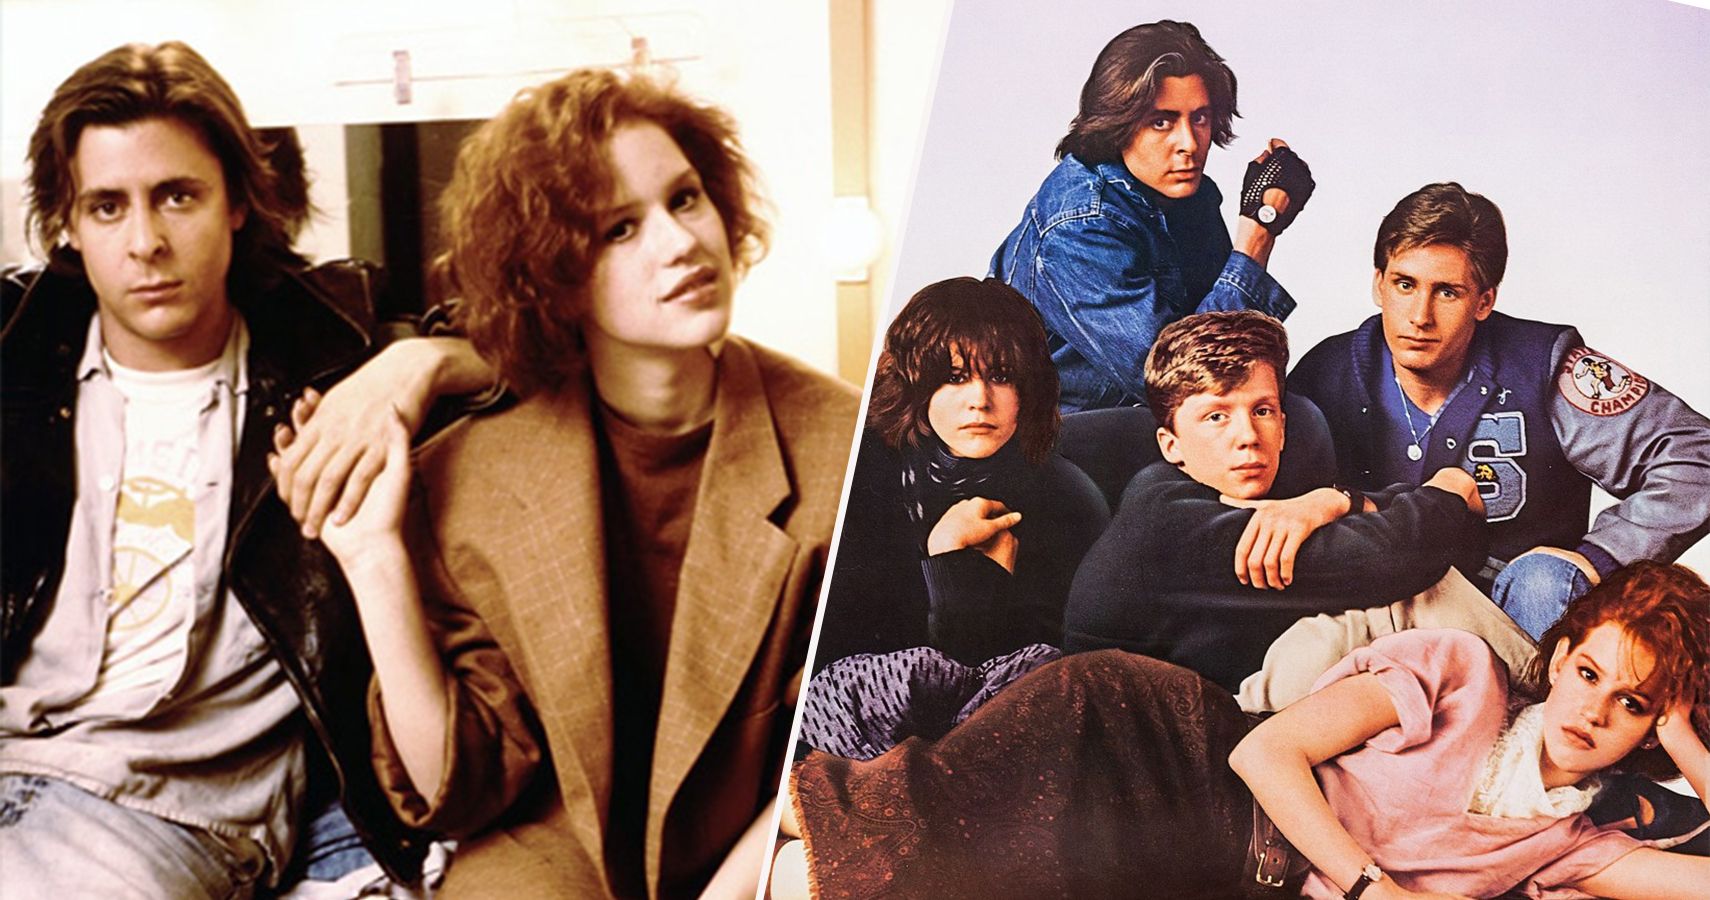 23 Crazy Details Behind The Making Of The Breakfast Club